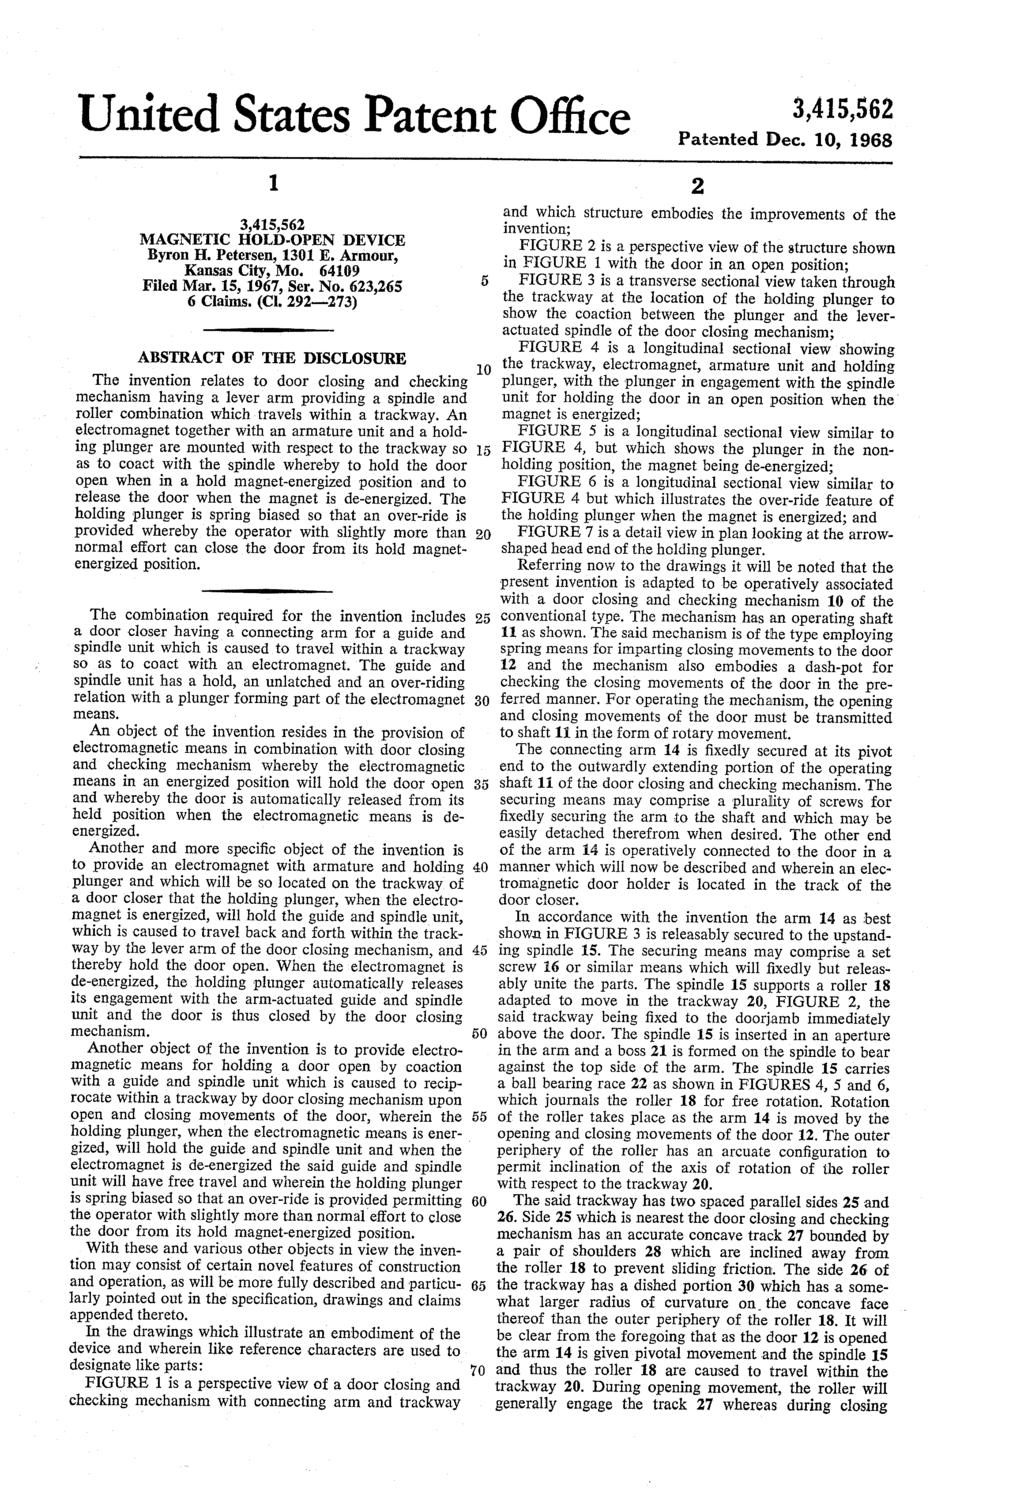 United States Patent Office 3,415,56 Patented Dec. 10, 1968 1. 3,415,56 MAGNETC HOLD.OPEN DEVICE Byron H. Petersen, 1301 E. Armour, Kansas City, Mo. 64109 Filed Mar. 15, 1967, Ser. No. 63,65 6 Claims.